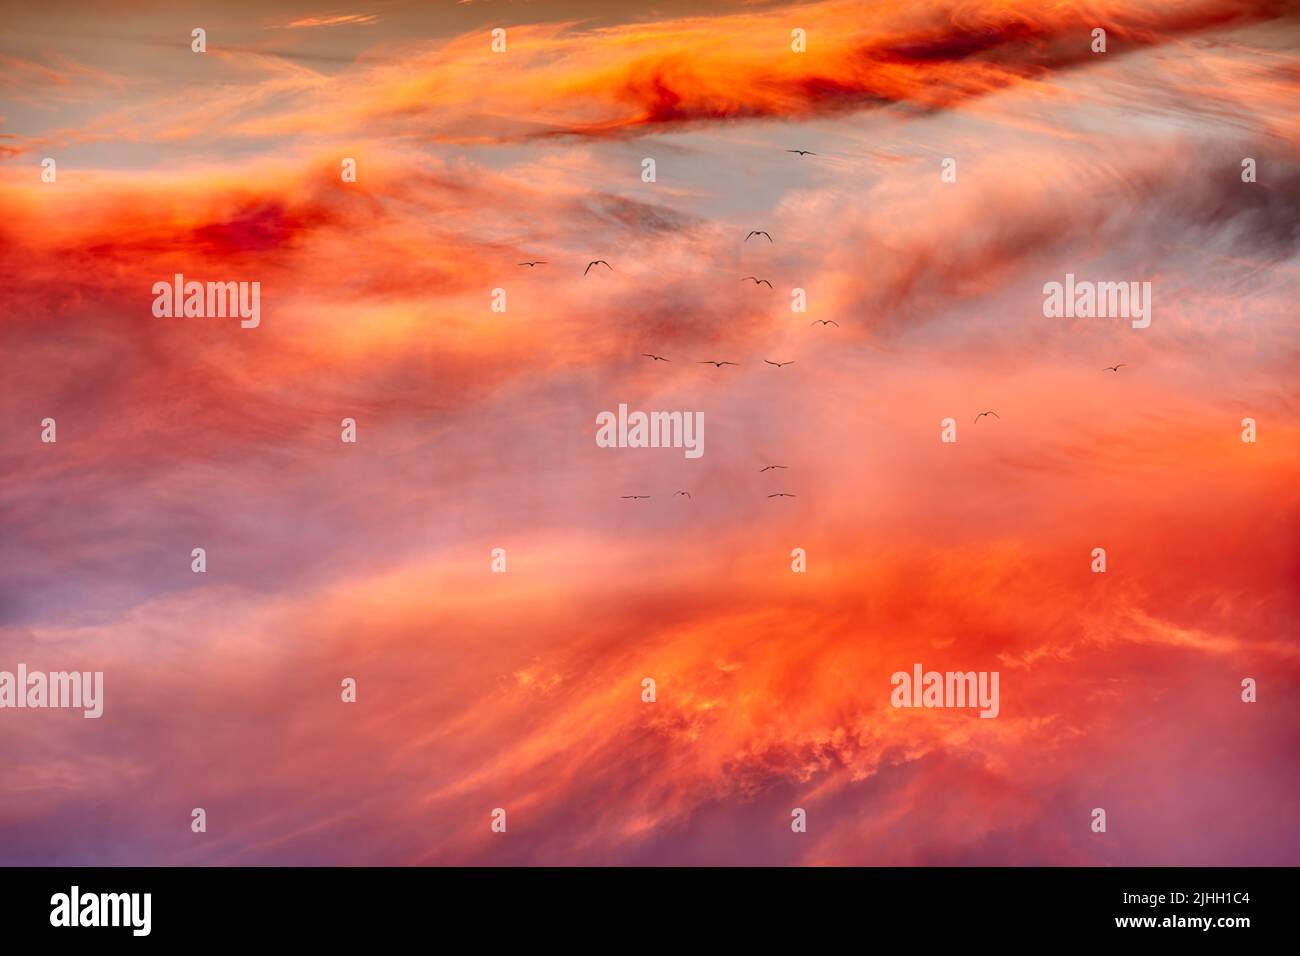 A Flock Of Bird Silhouettes Flying Against A Detailed Colorful Cloudscape Sky Stock Photo